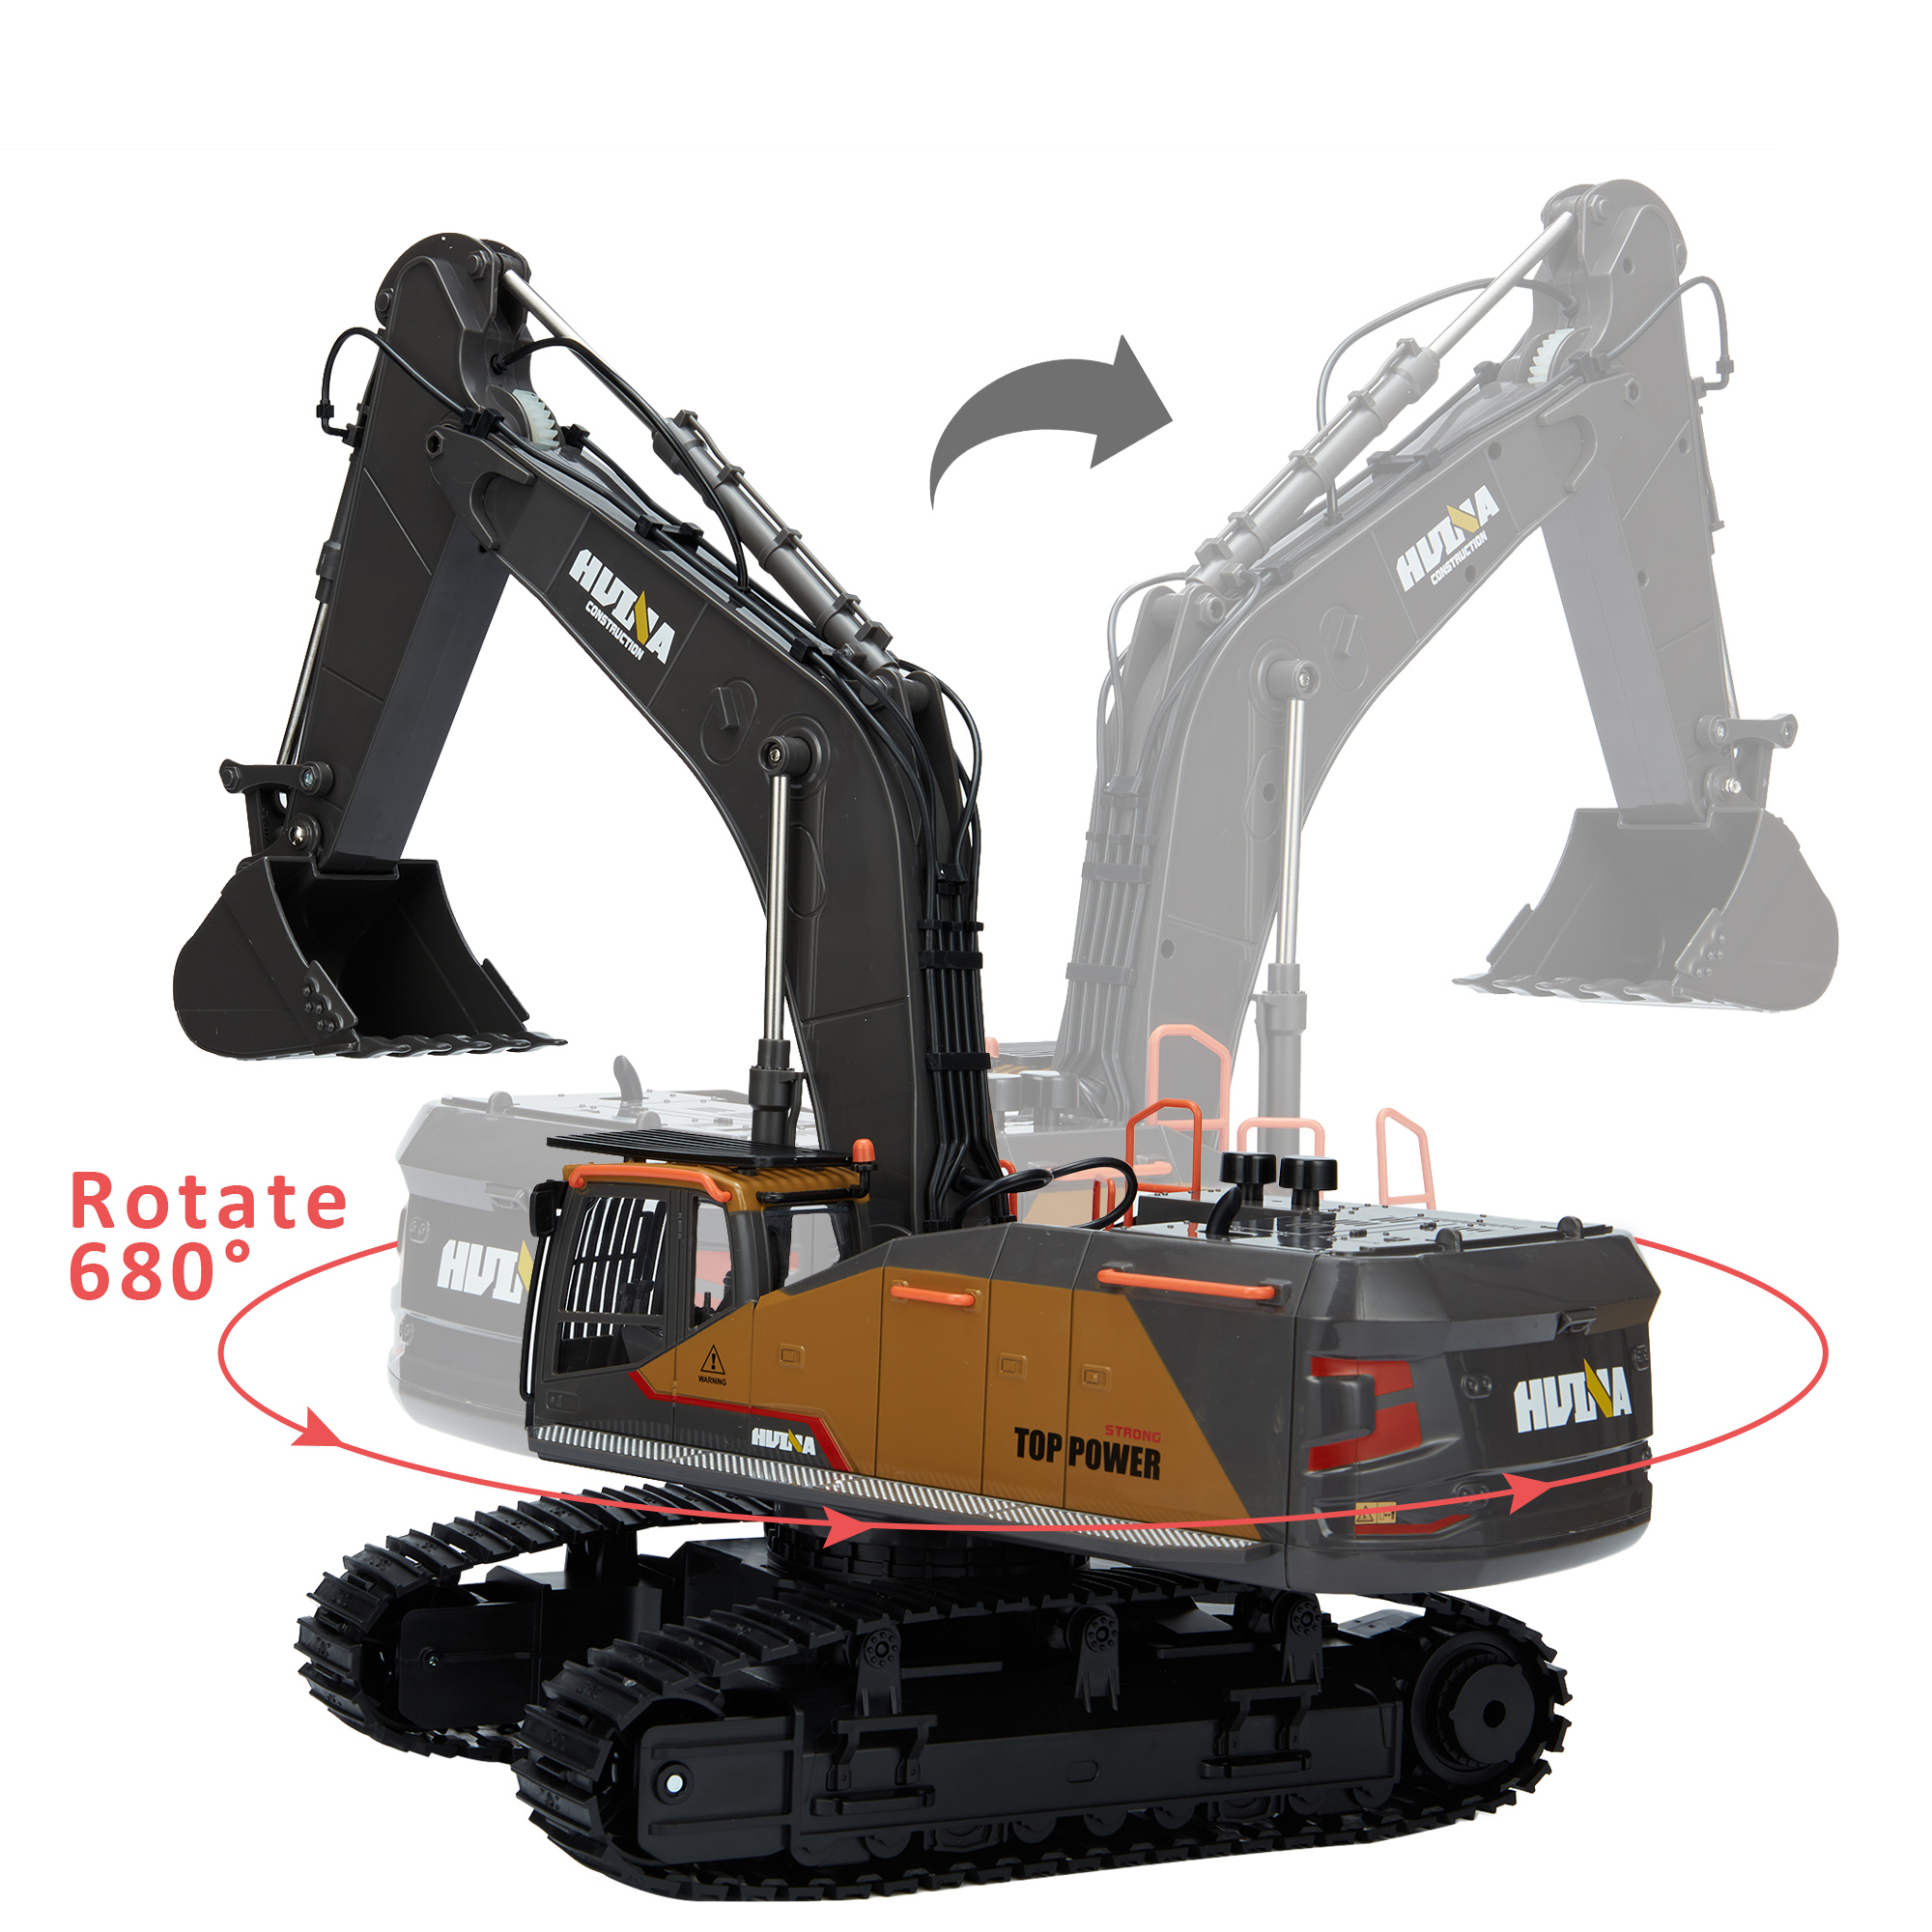 Excavator Toy Remote Control Excavator RC Truck Toy,22 Channel Rechargeable RC Truck Mini Construction excavator1/24 Scale RC Excavator Construction Vehicles Gifts - image 2 of 8